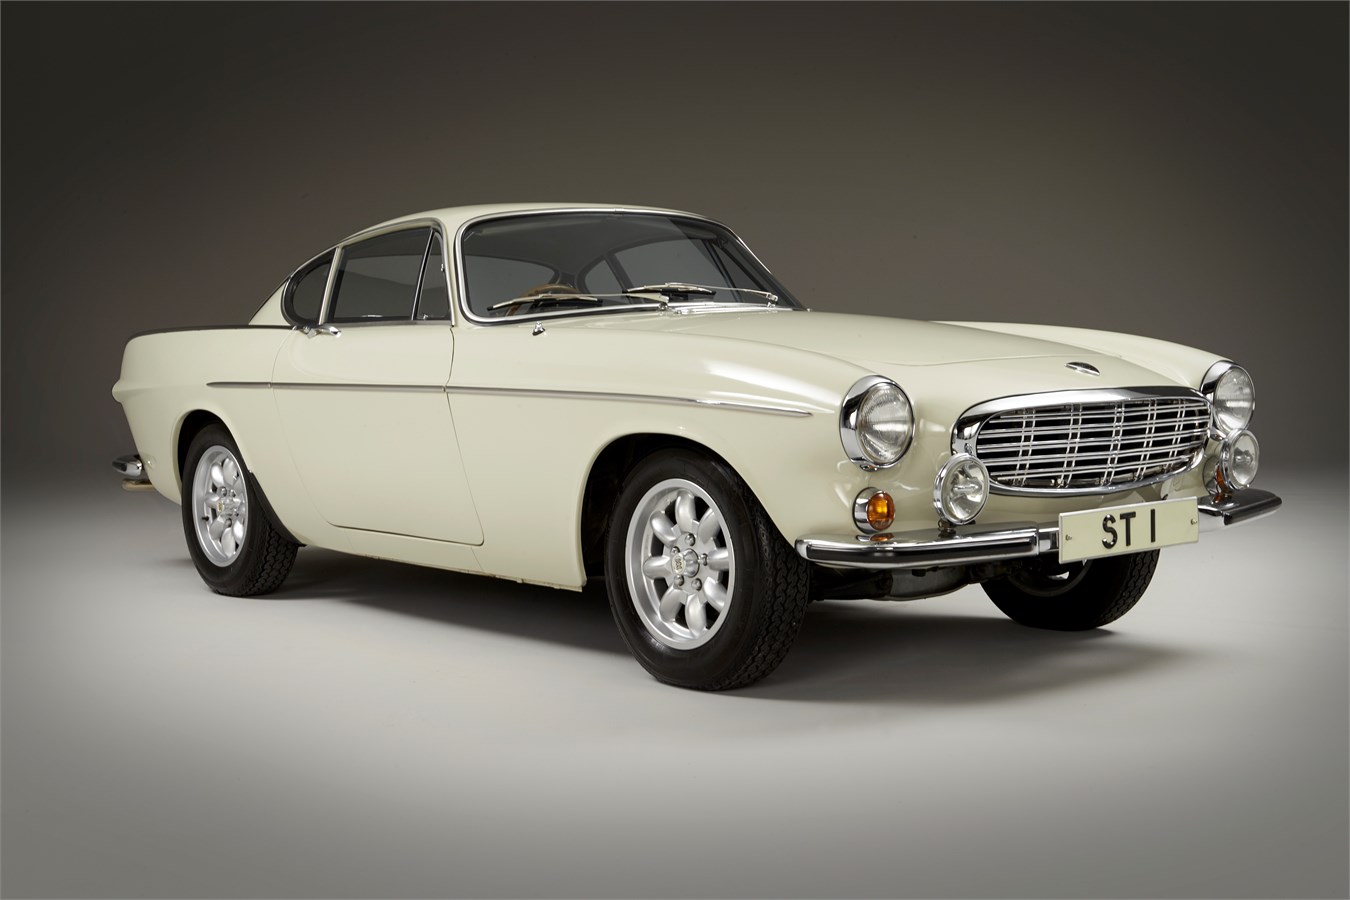 1967 Volvo 1800 S "ST1" from "The Saint" (TV Series)